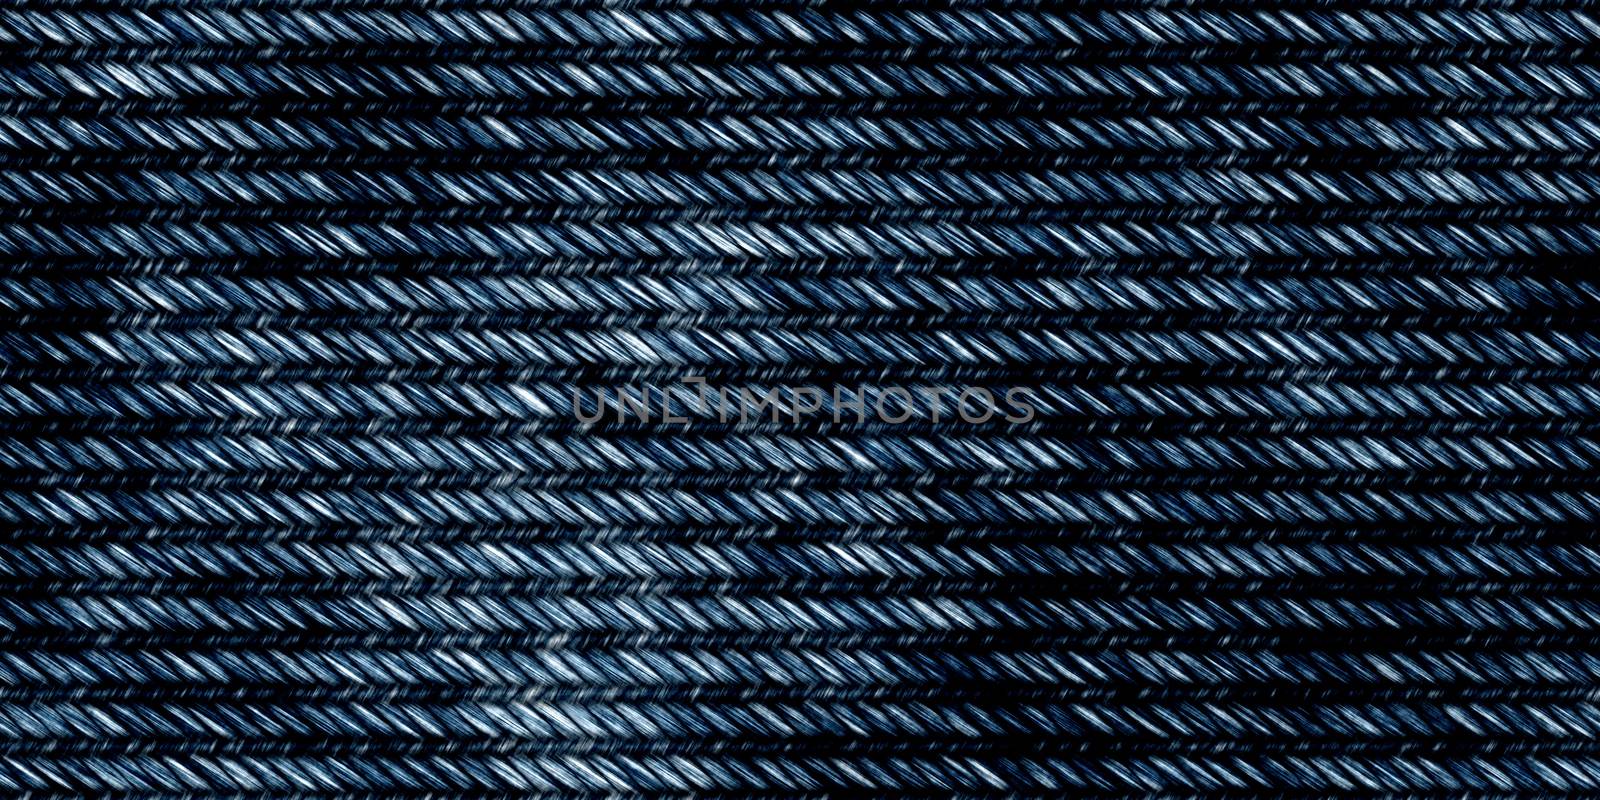 Blue Jeans Denim Seamless Textures. Textile Fabric Background. Jeans Clothing Material Surface. Grunge Wear Pattern. Macro Closeup.